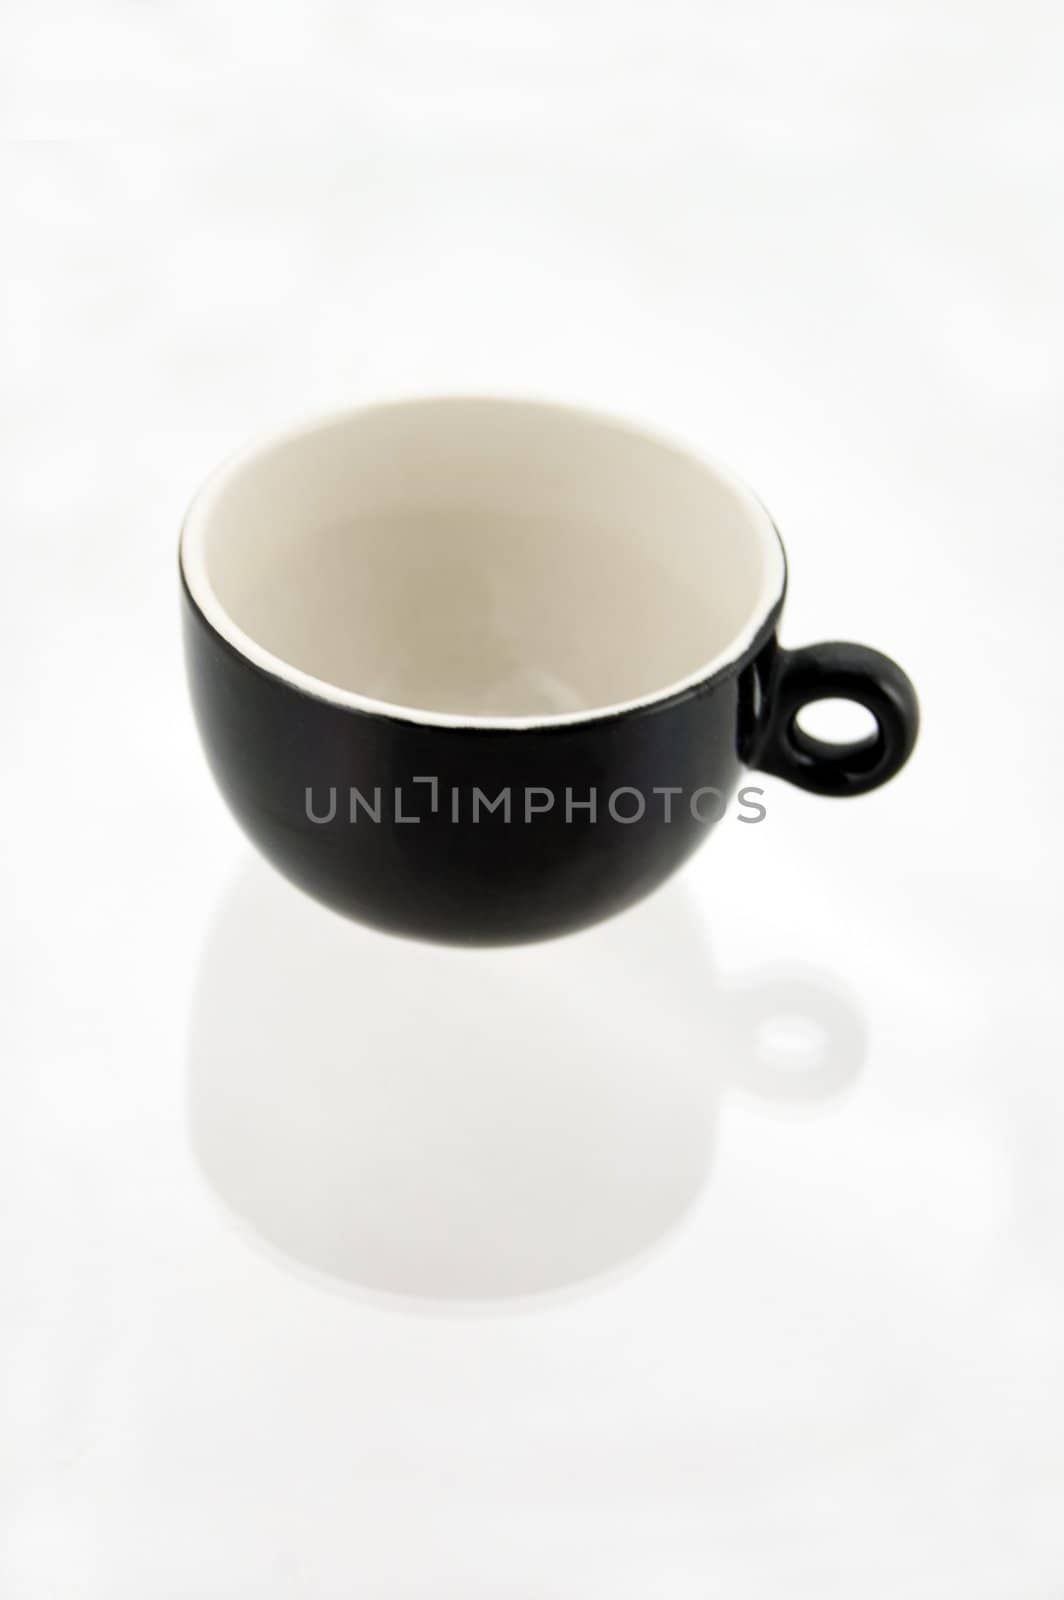 essential photo of an empty black and white cup for coffee with shadow reflection